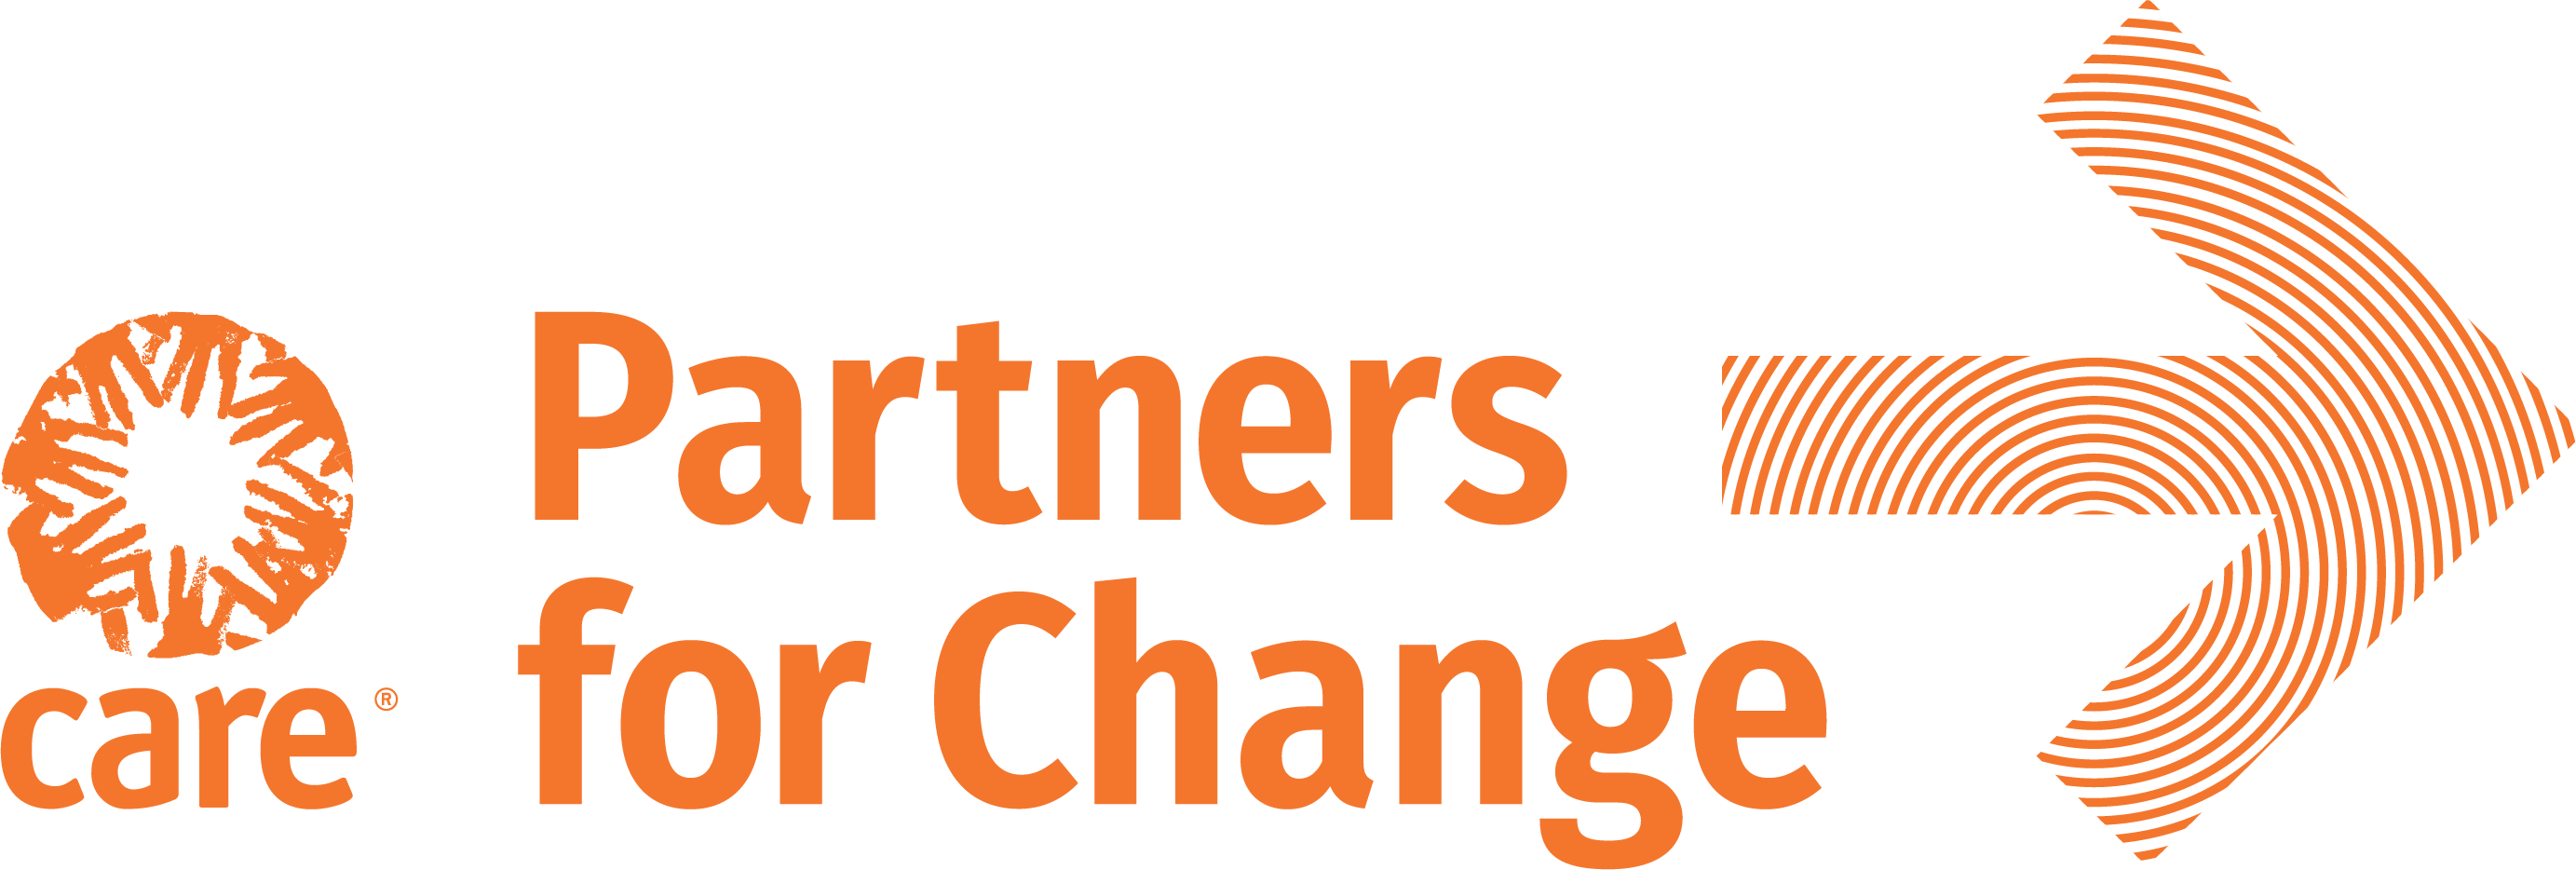 CARE | Partners for Change